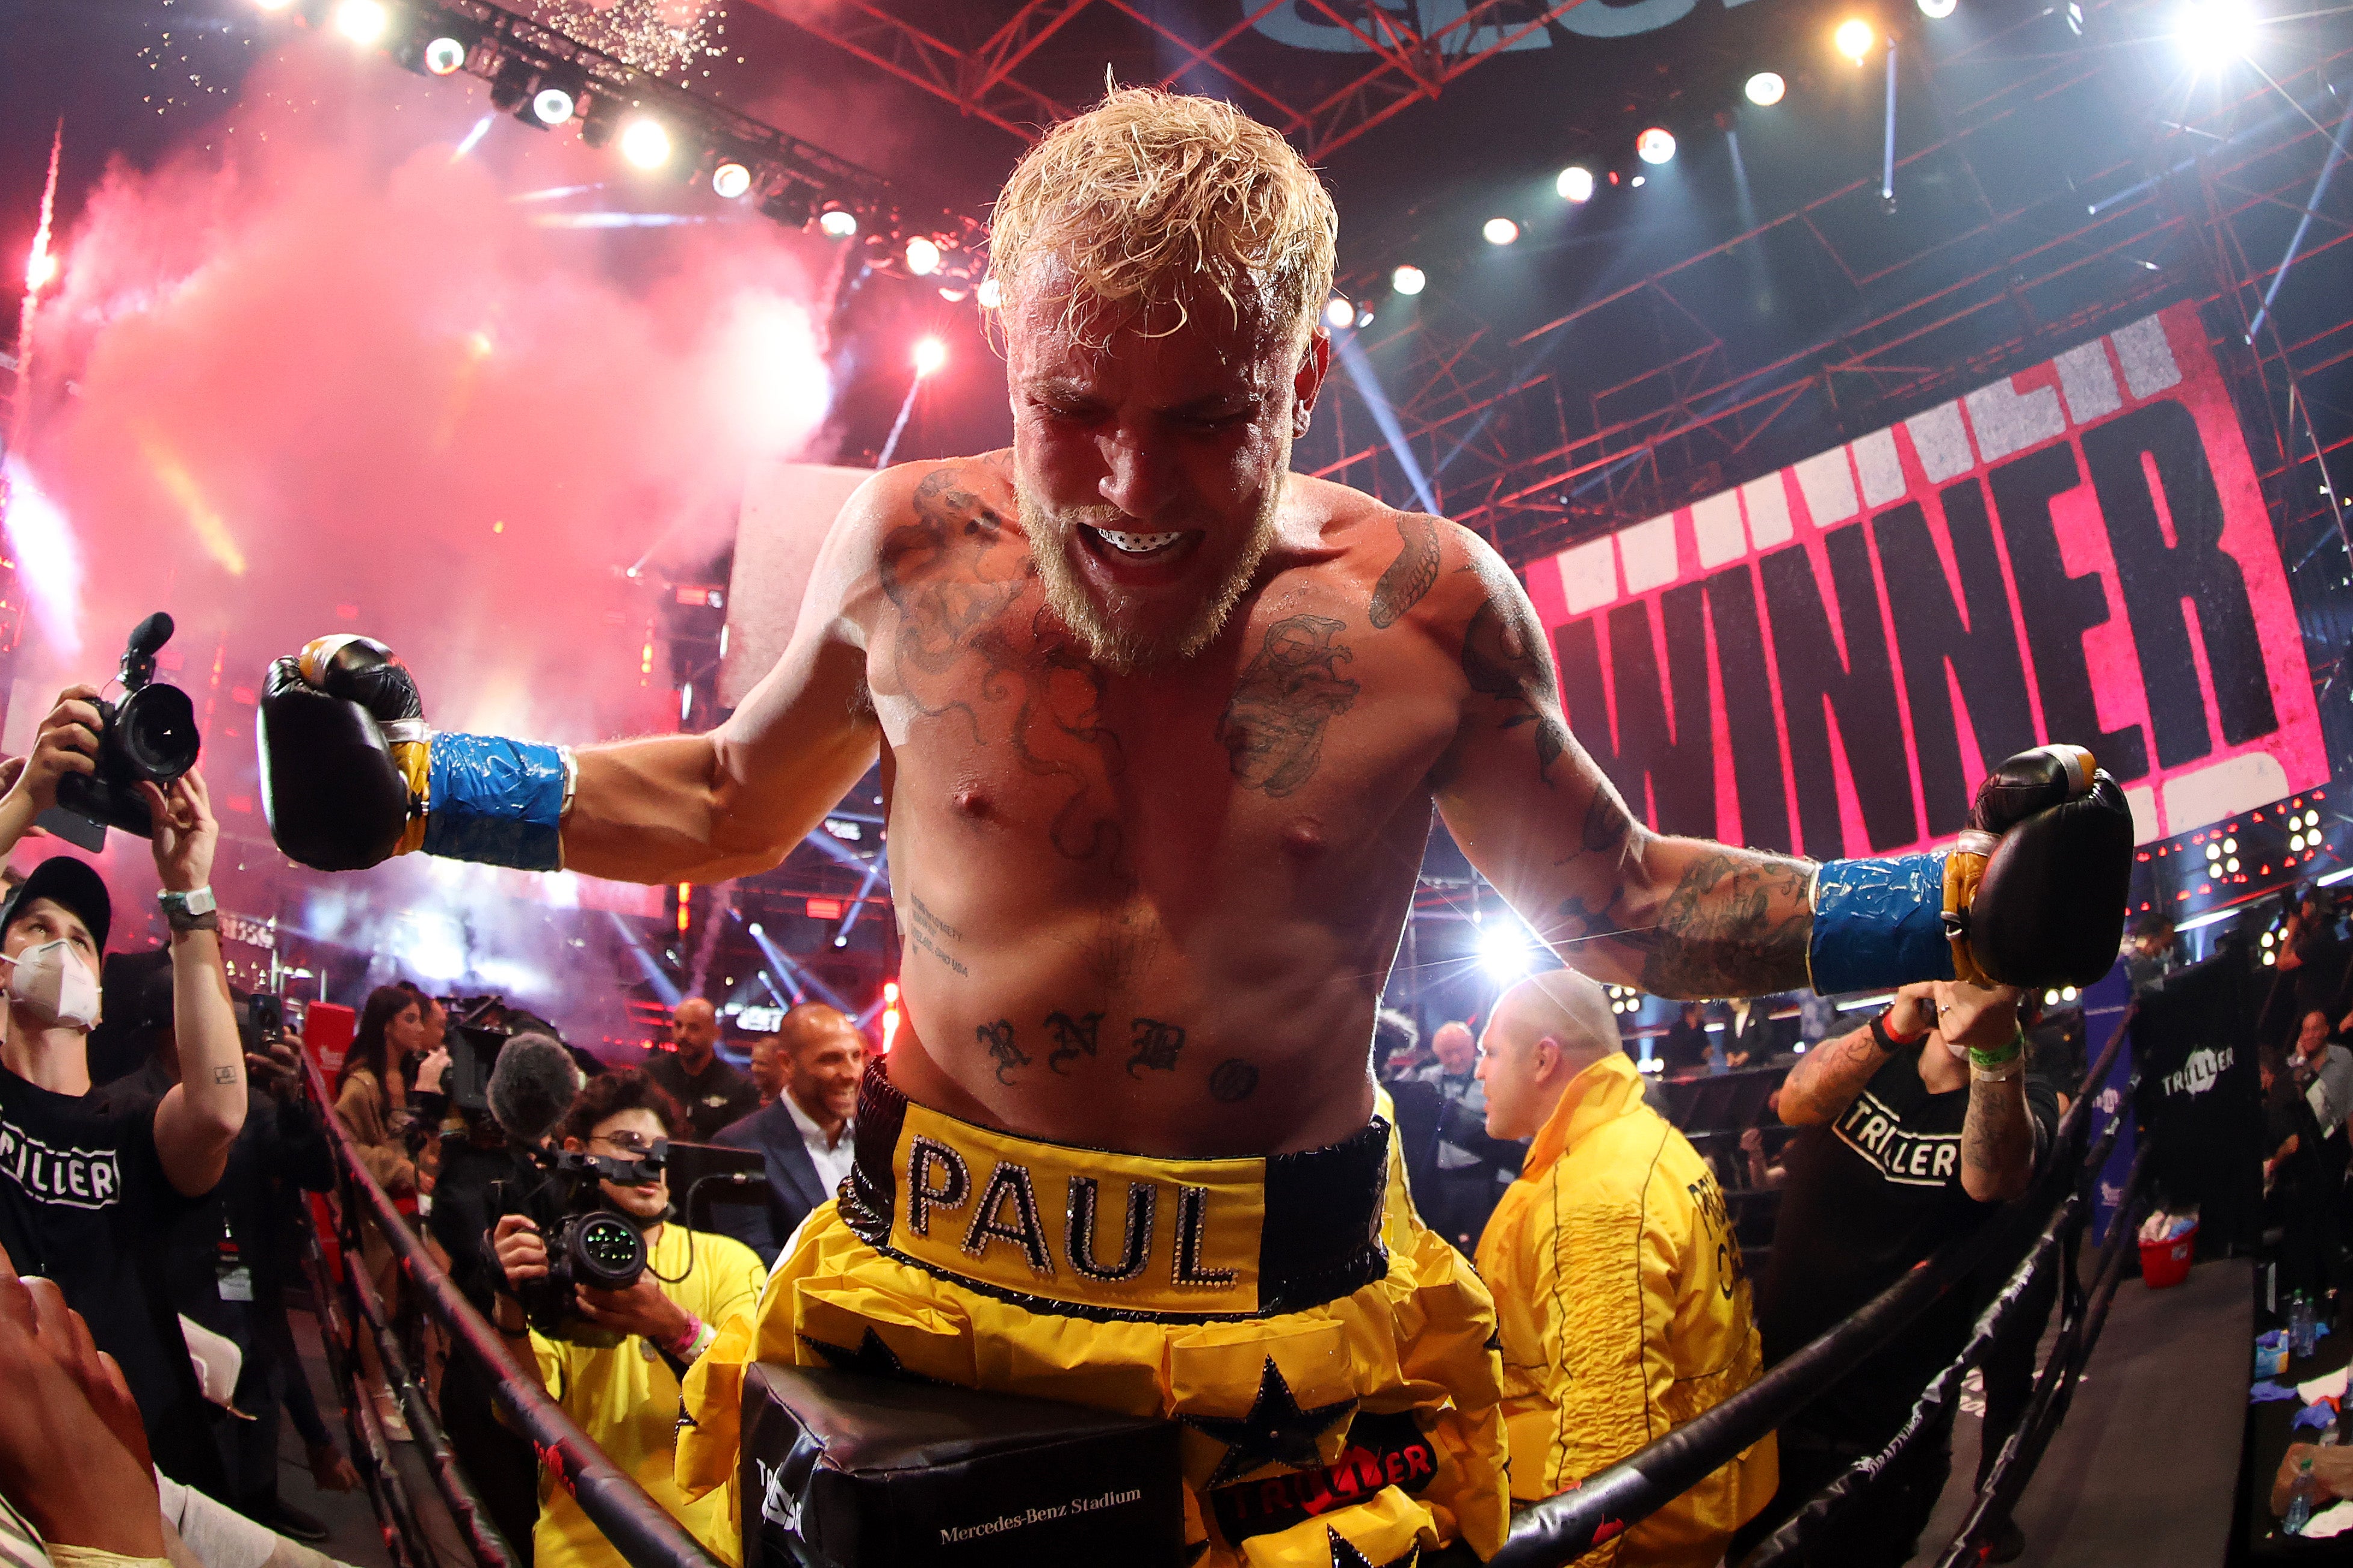 Jake Paul has claimed both fighters would earn $50m from the event